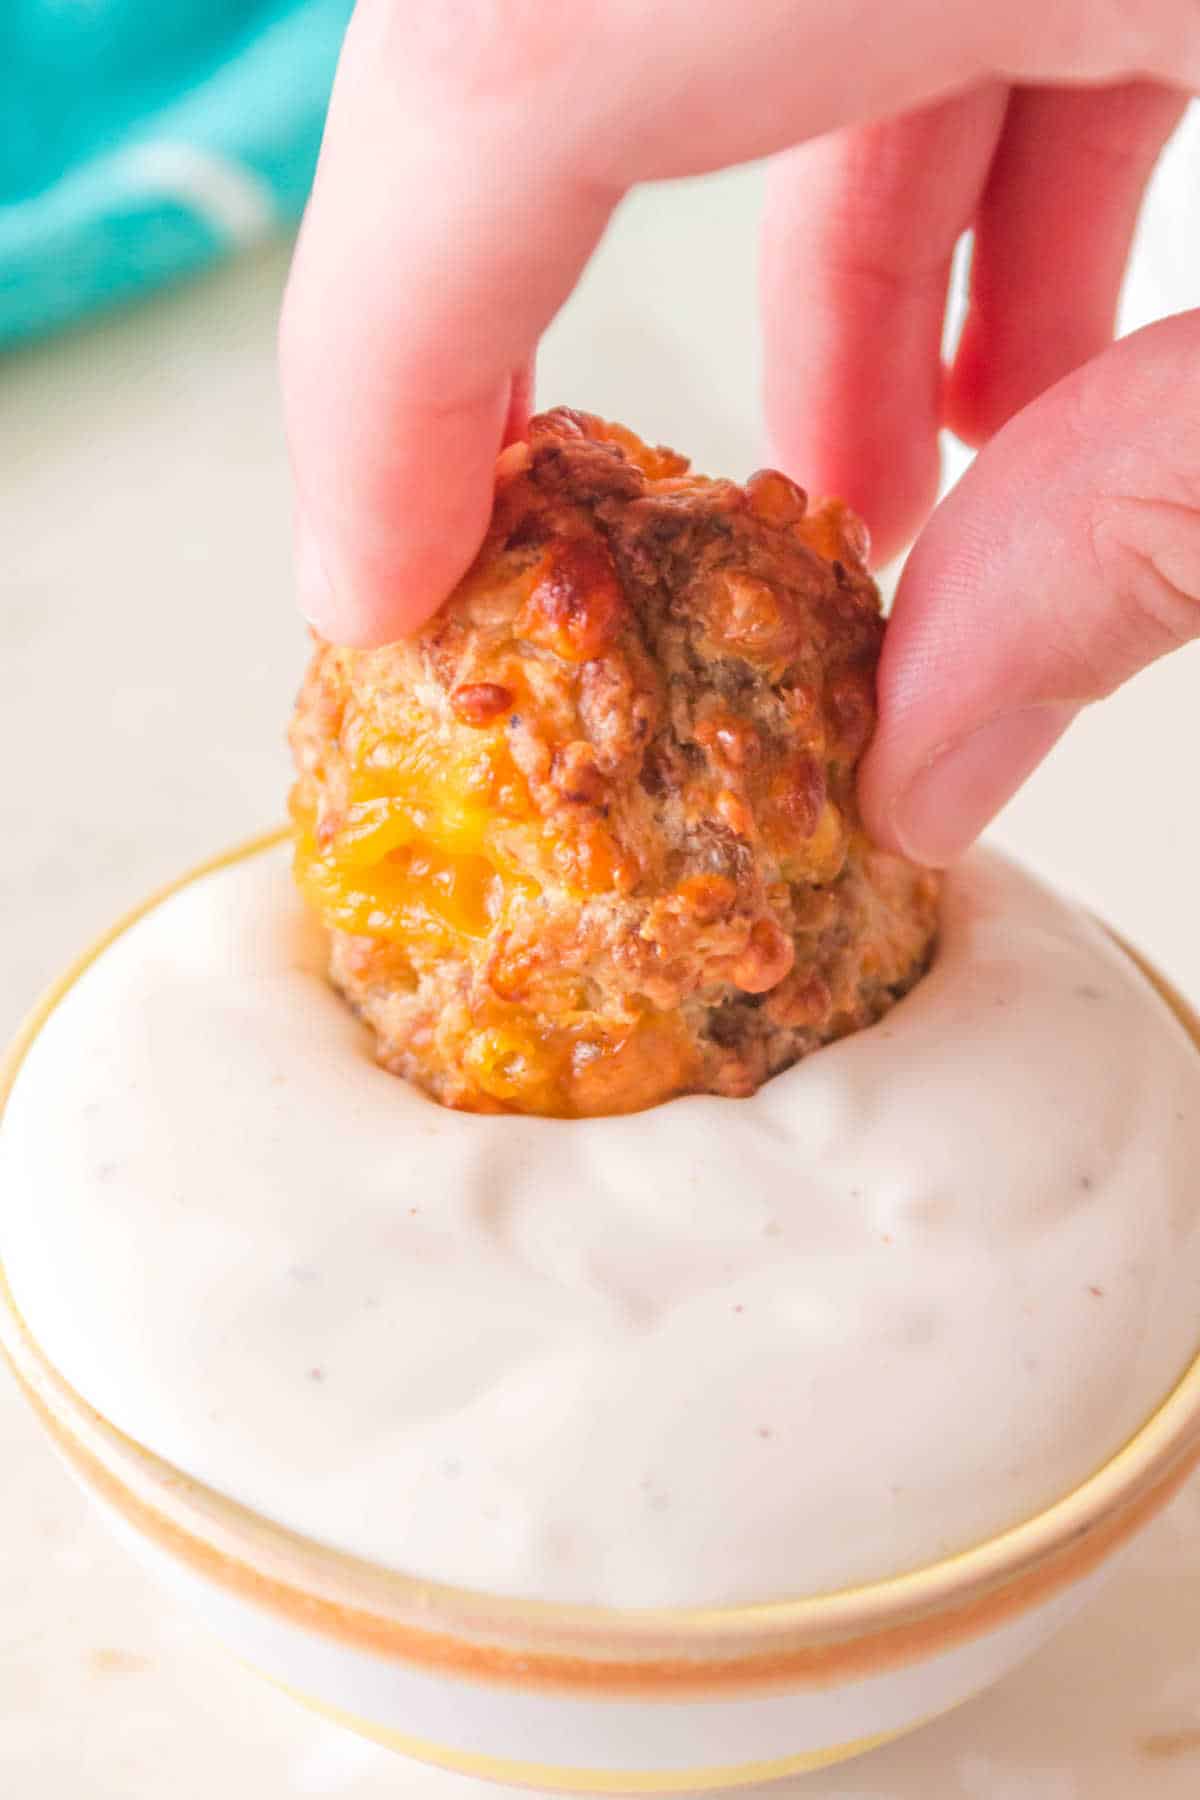 A hand dipping a sausage ball in ranch dip.